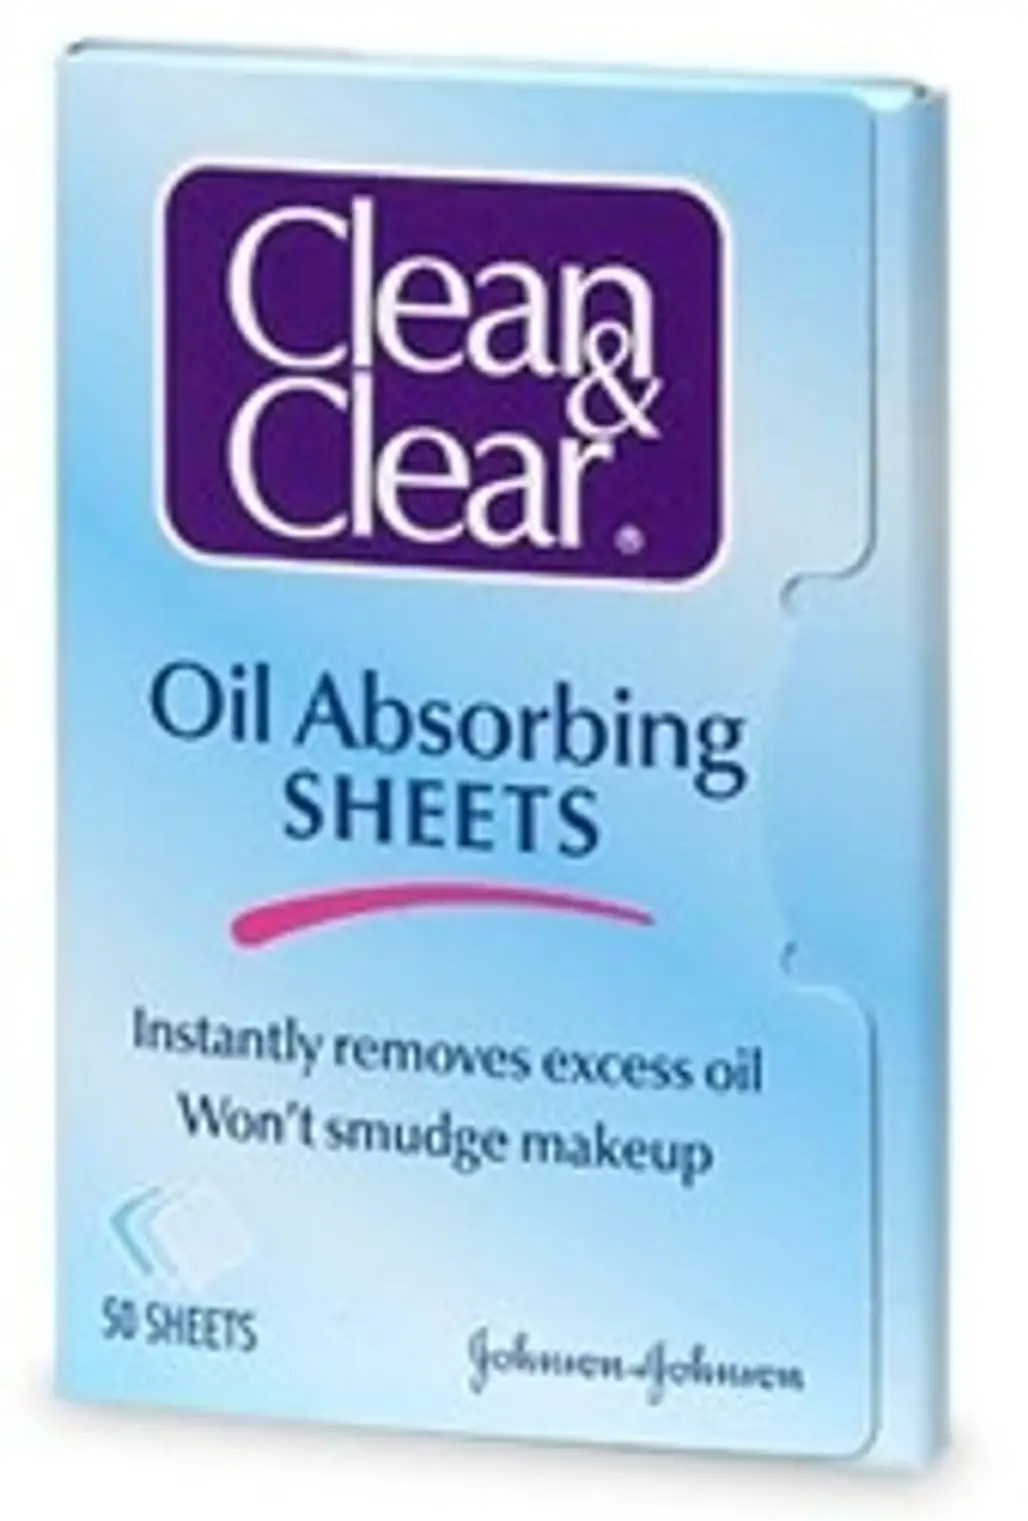 Clean and Clear Oil Absorbing Sheets